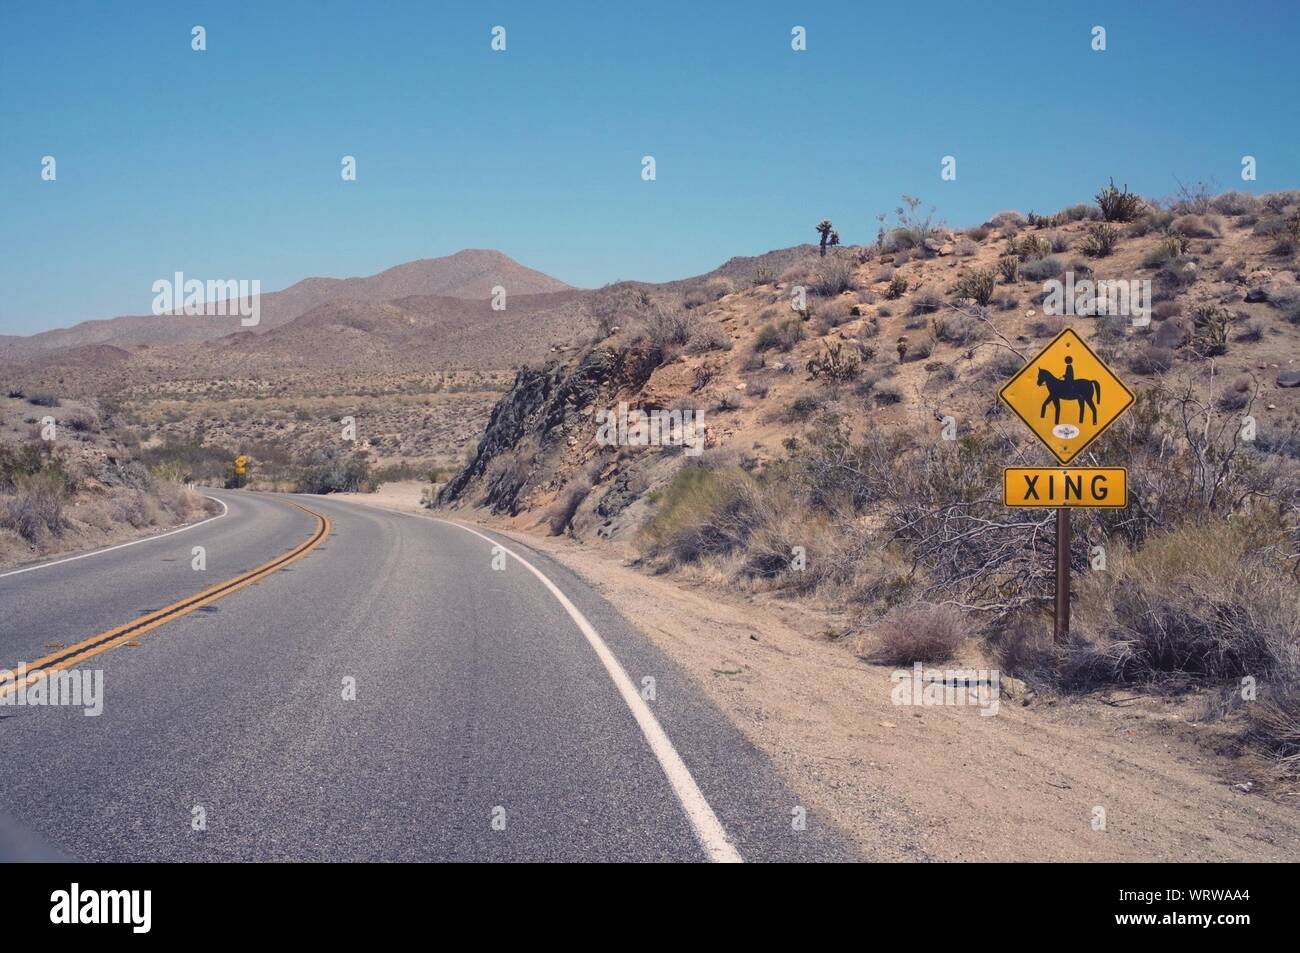 Sign By Road In Remote Area Stock Photo